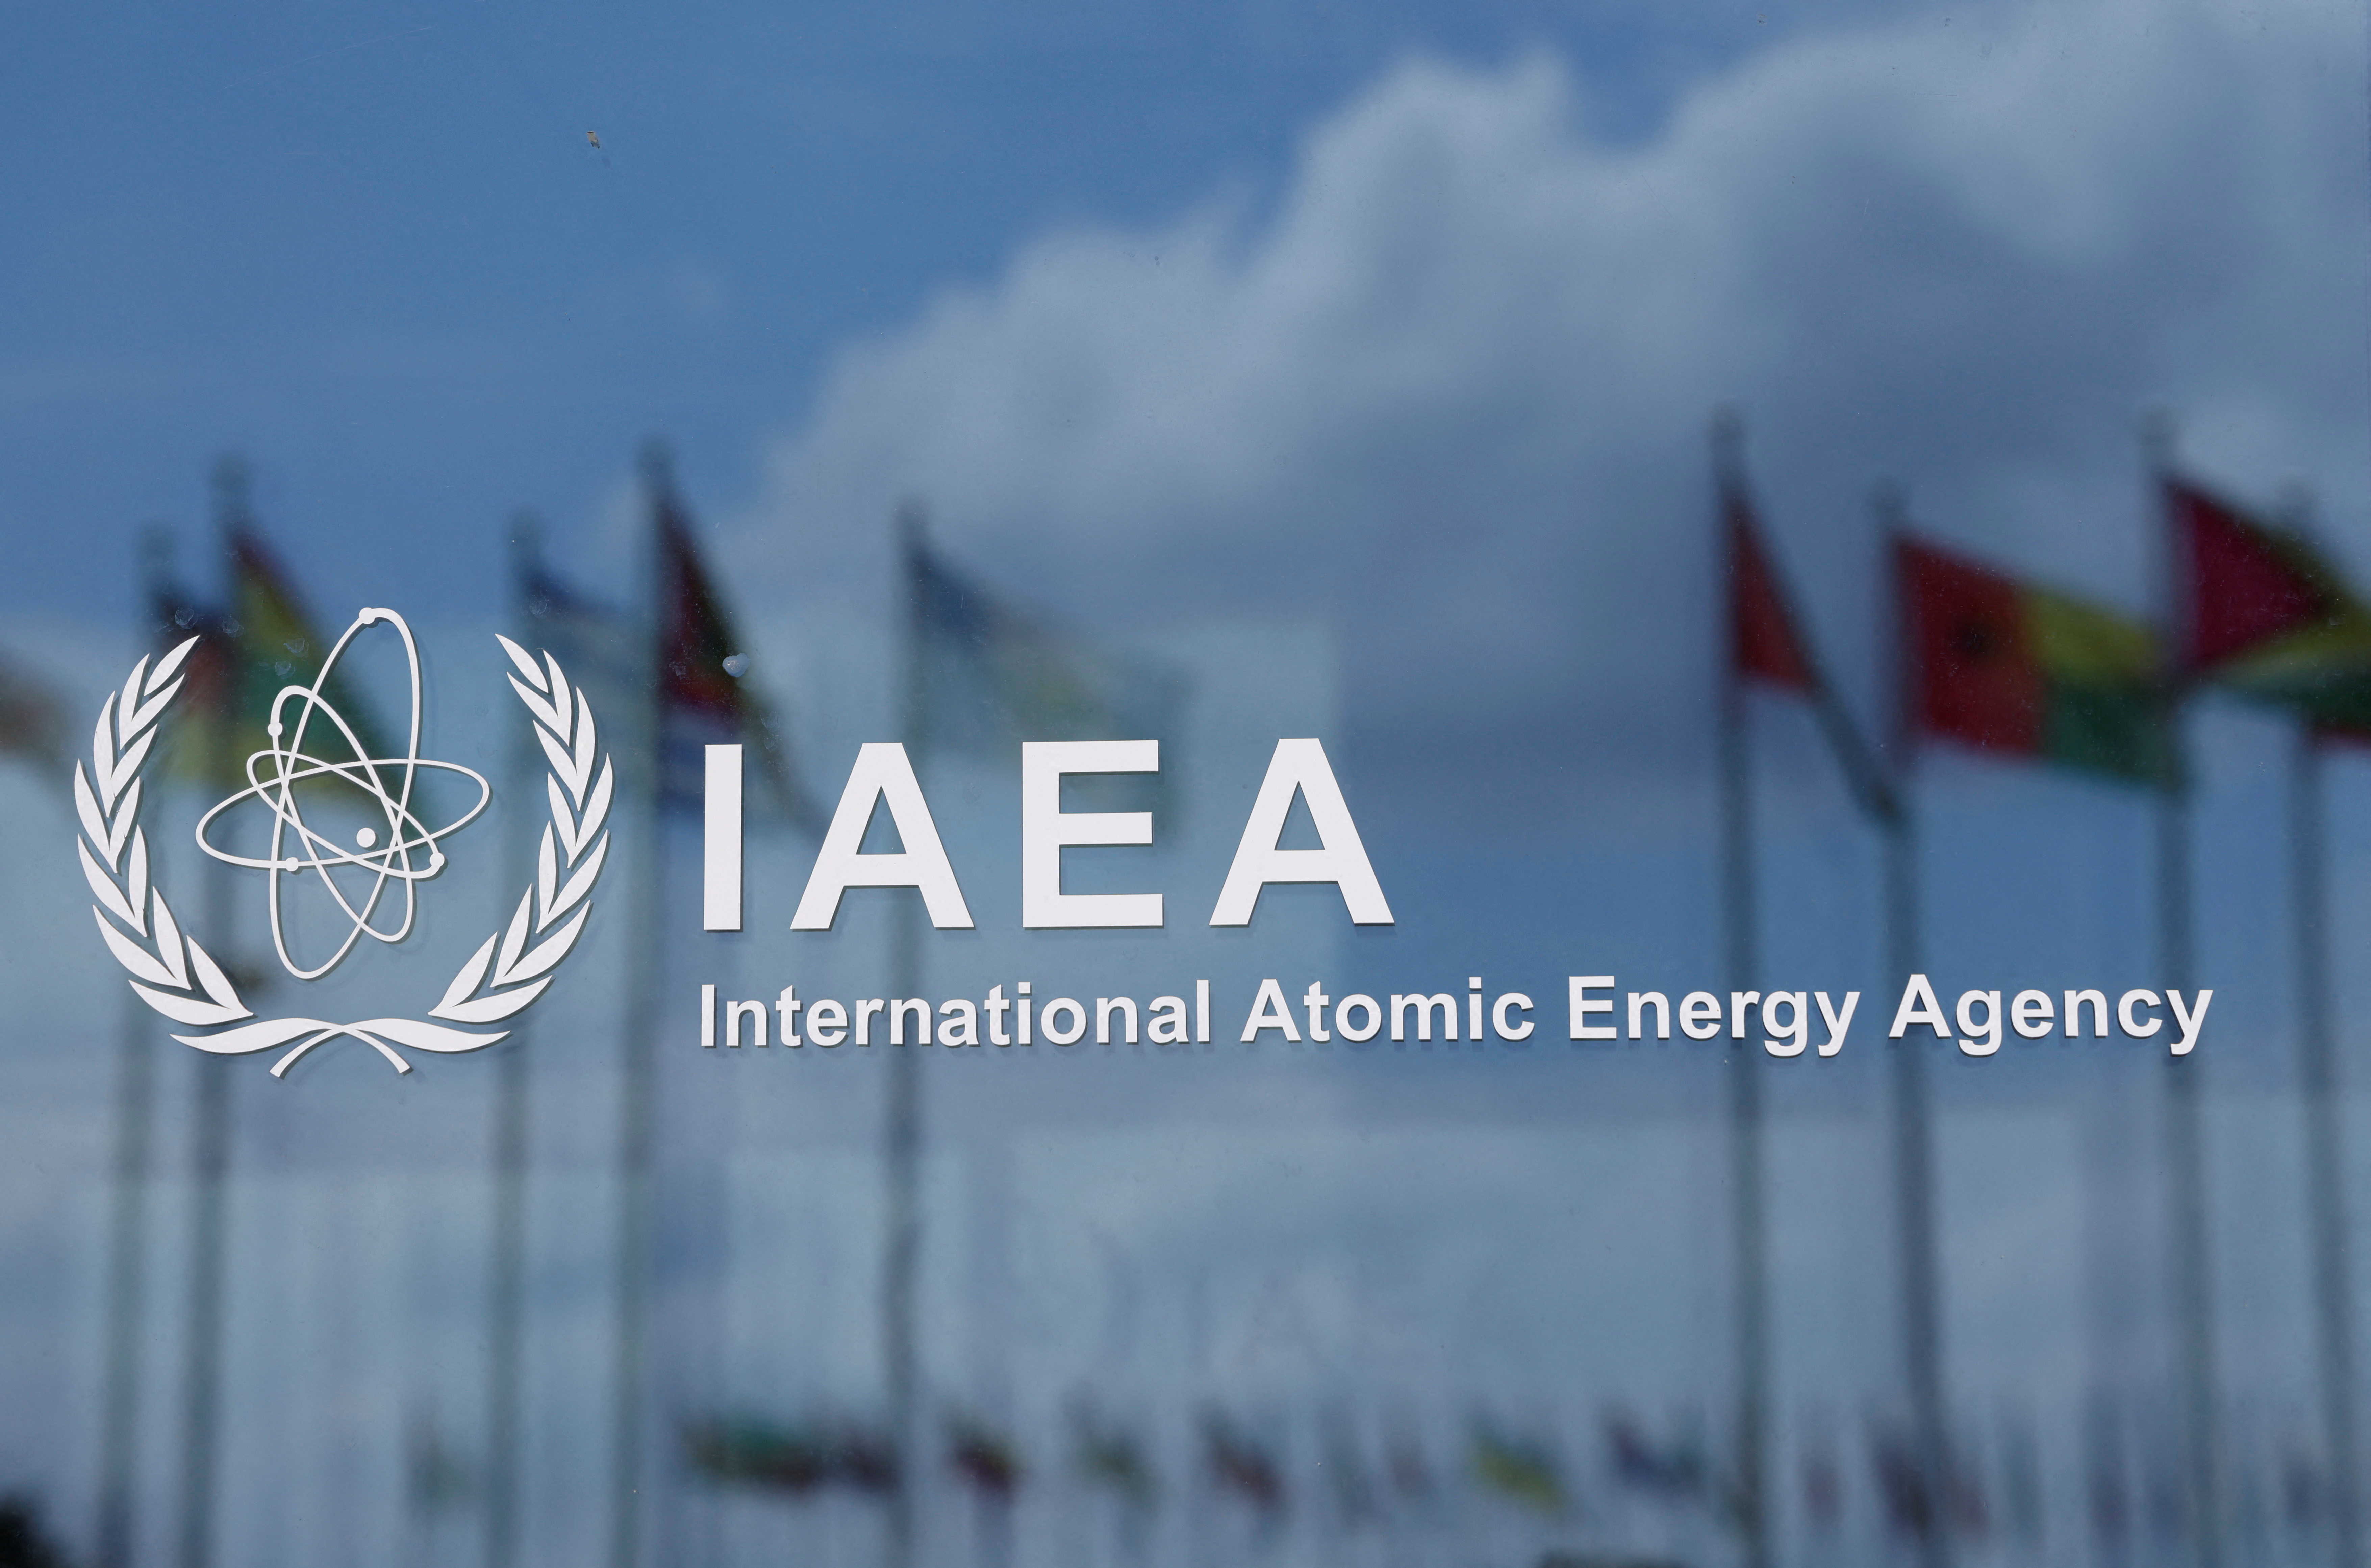 IAEA logo is displayed at its headquarters in Vienna